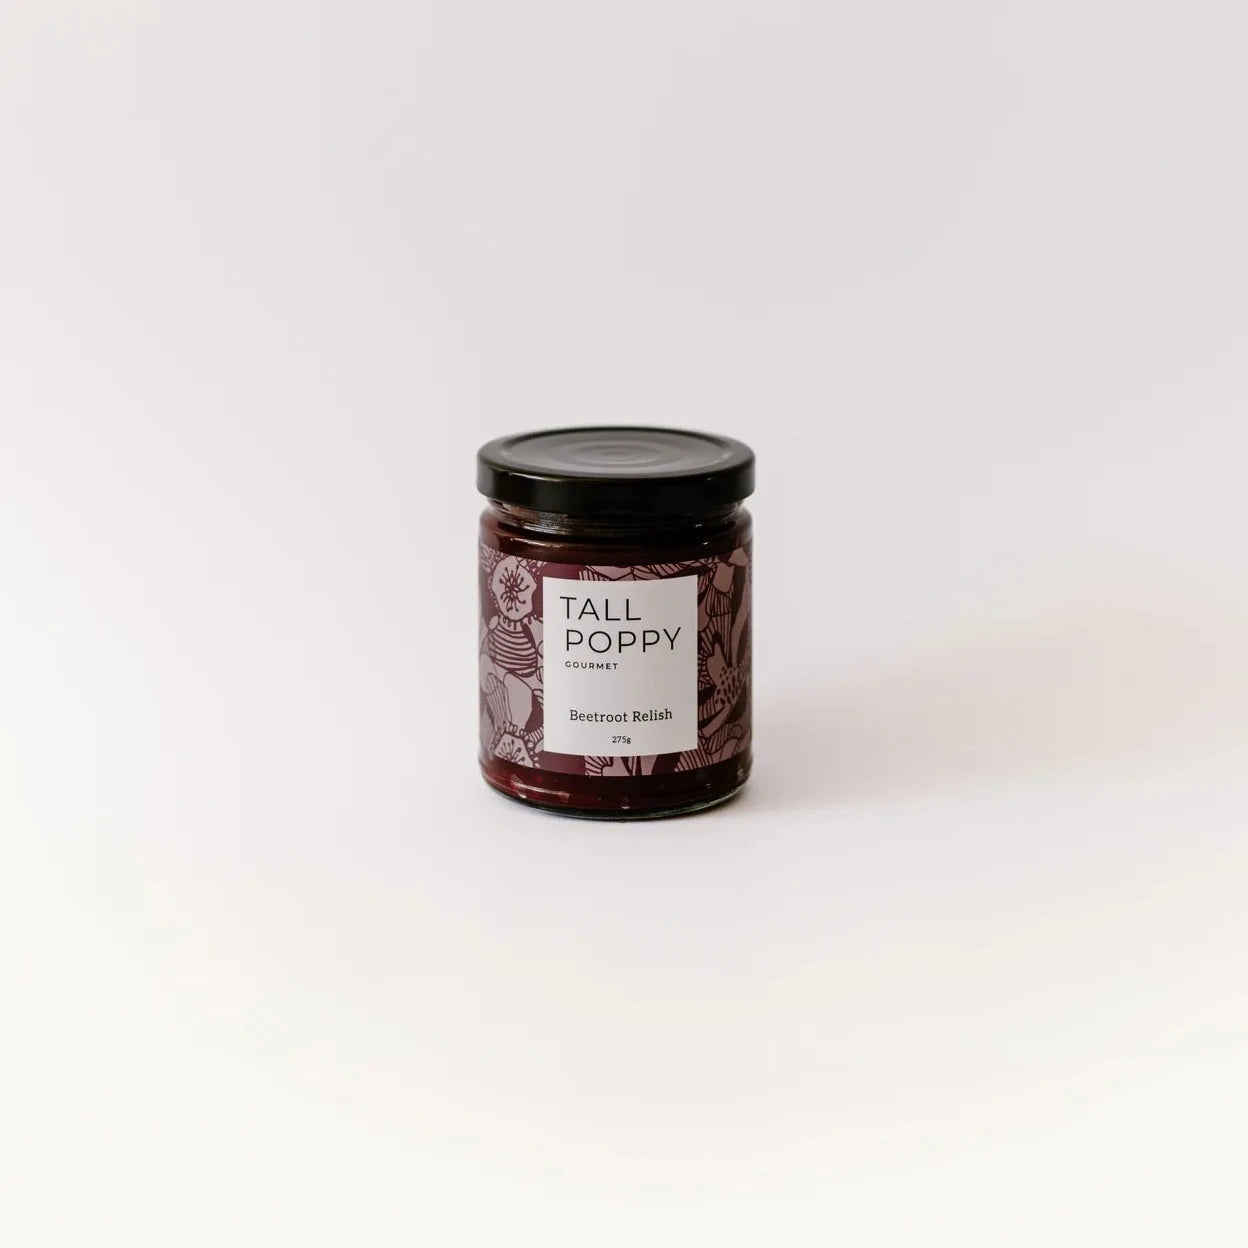 Tall Poppy Beetroot Relish 275gm